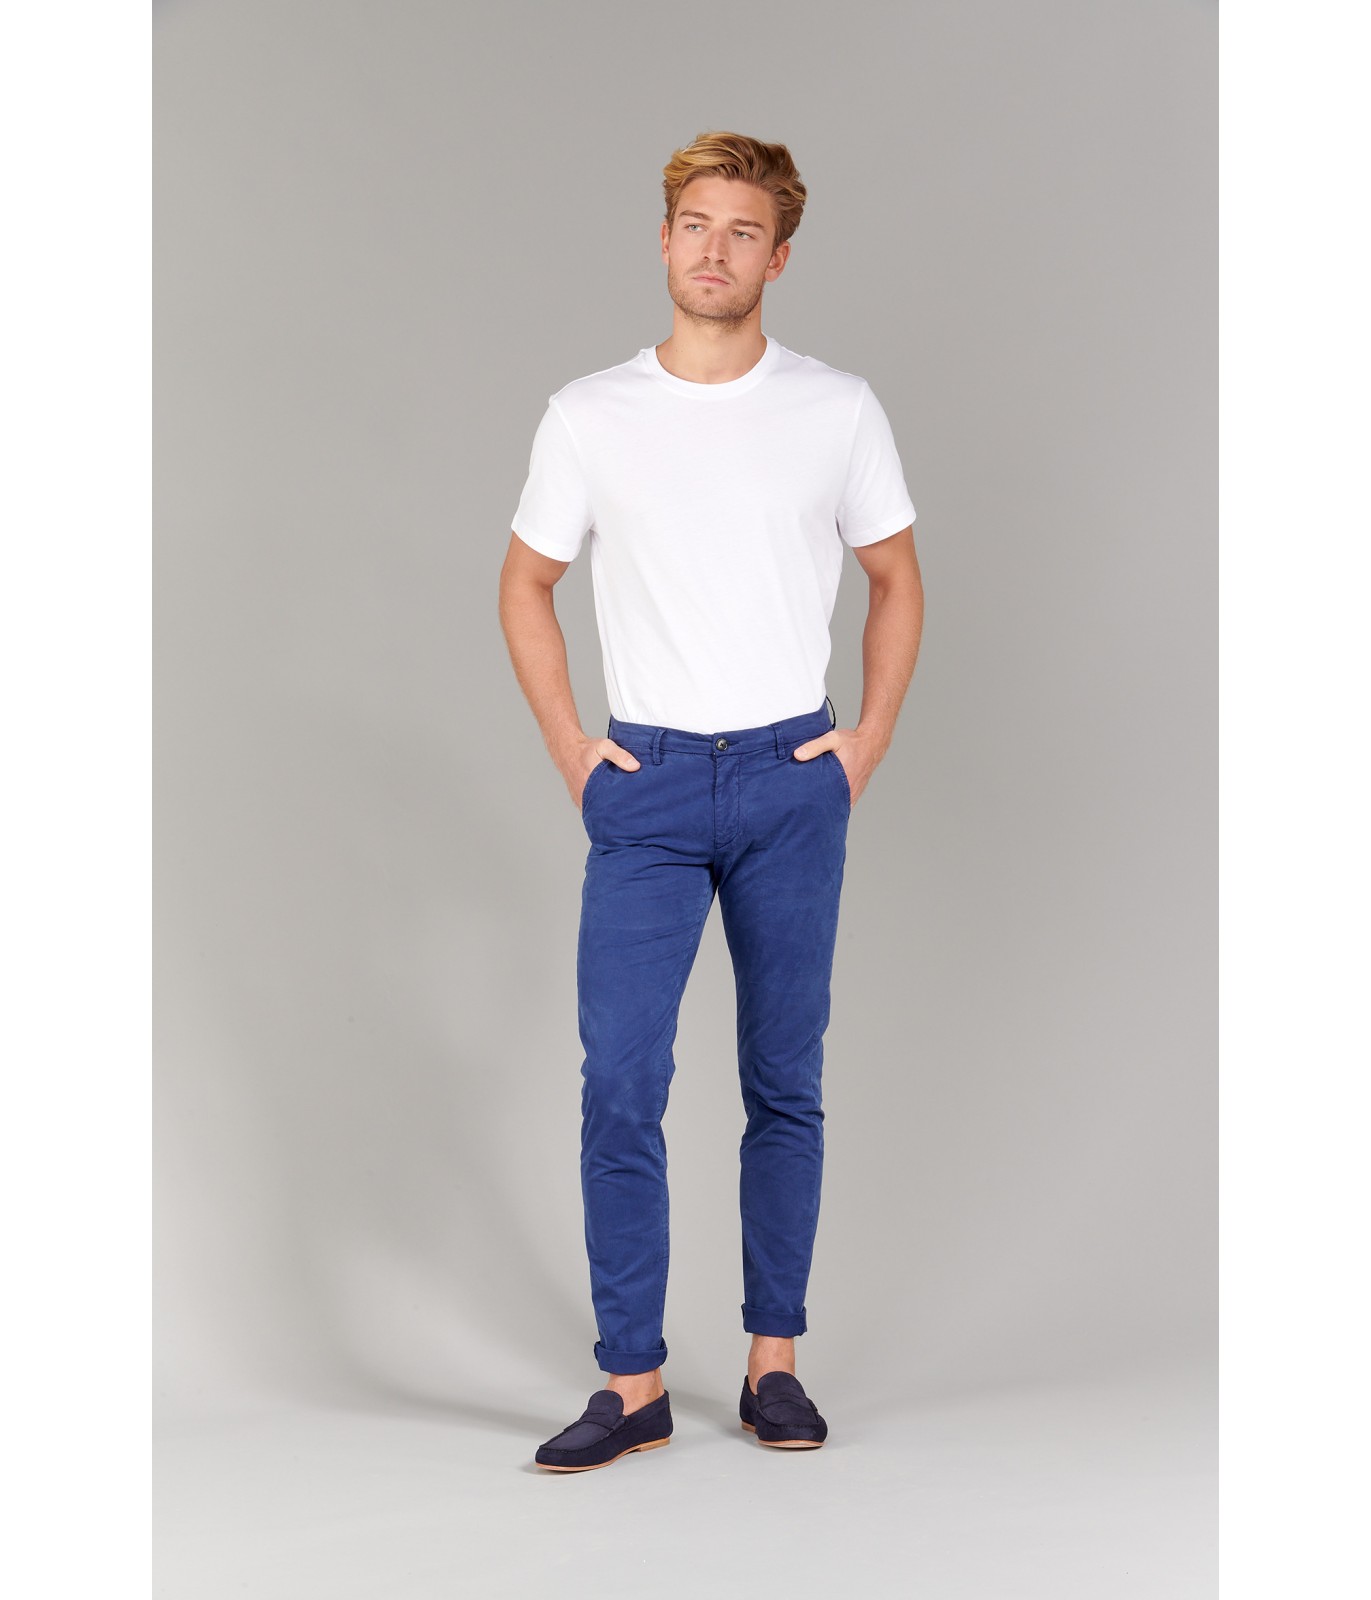 Buy American Noti Blue Chinos for Men Stretchable Trousers for Men  Slim  fit Pants for Men  Chinos Pants for Mens  Cotton Chinos for Men Online at  Low Prices in